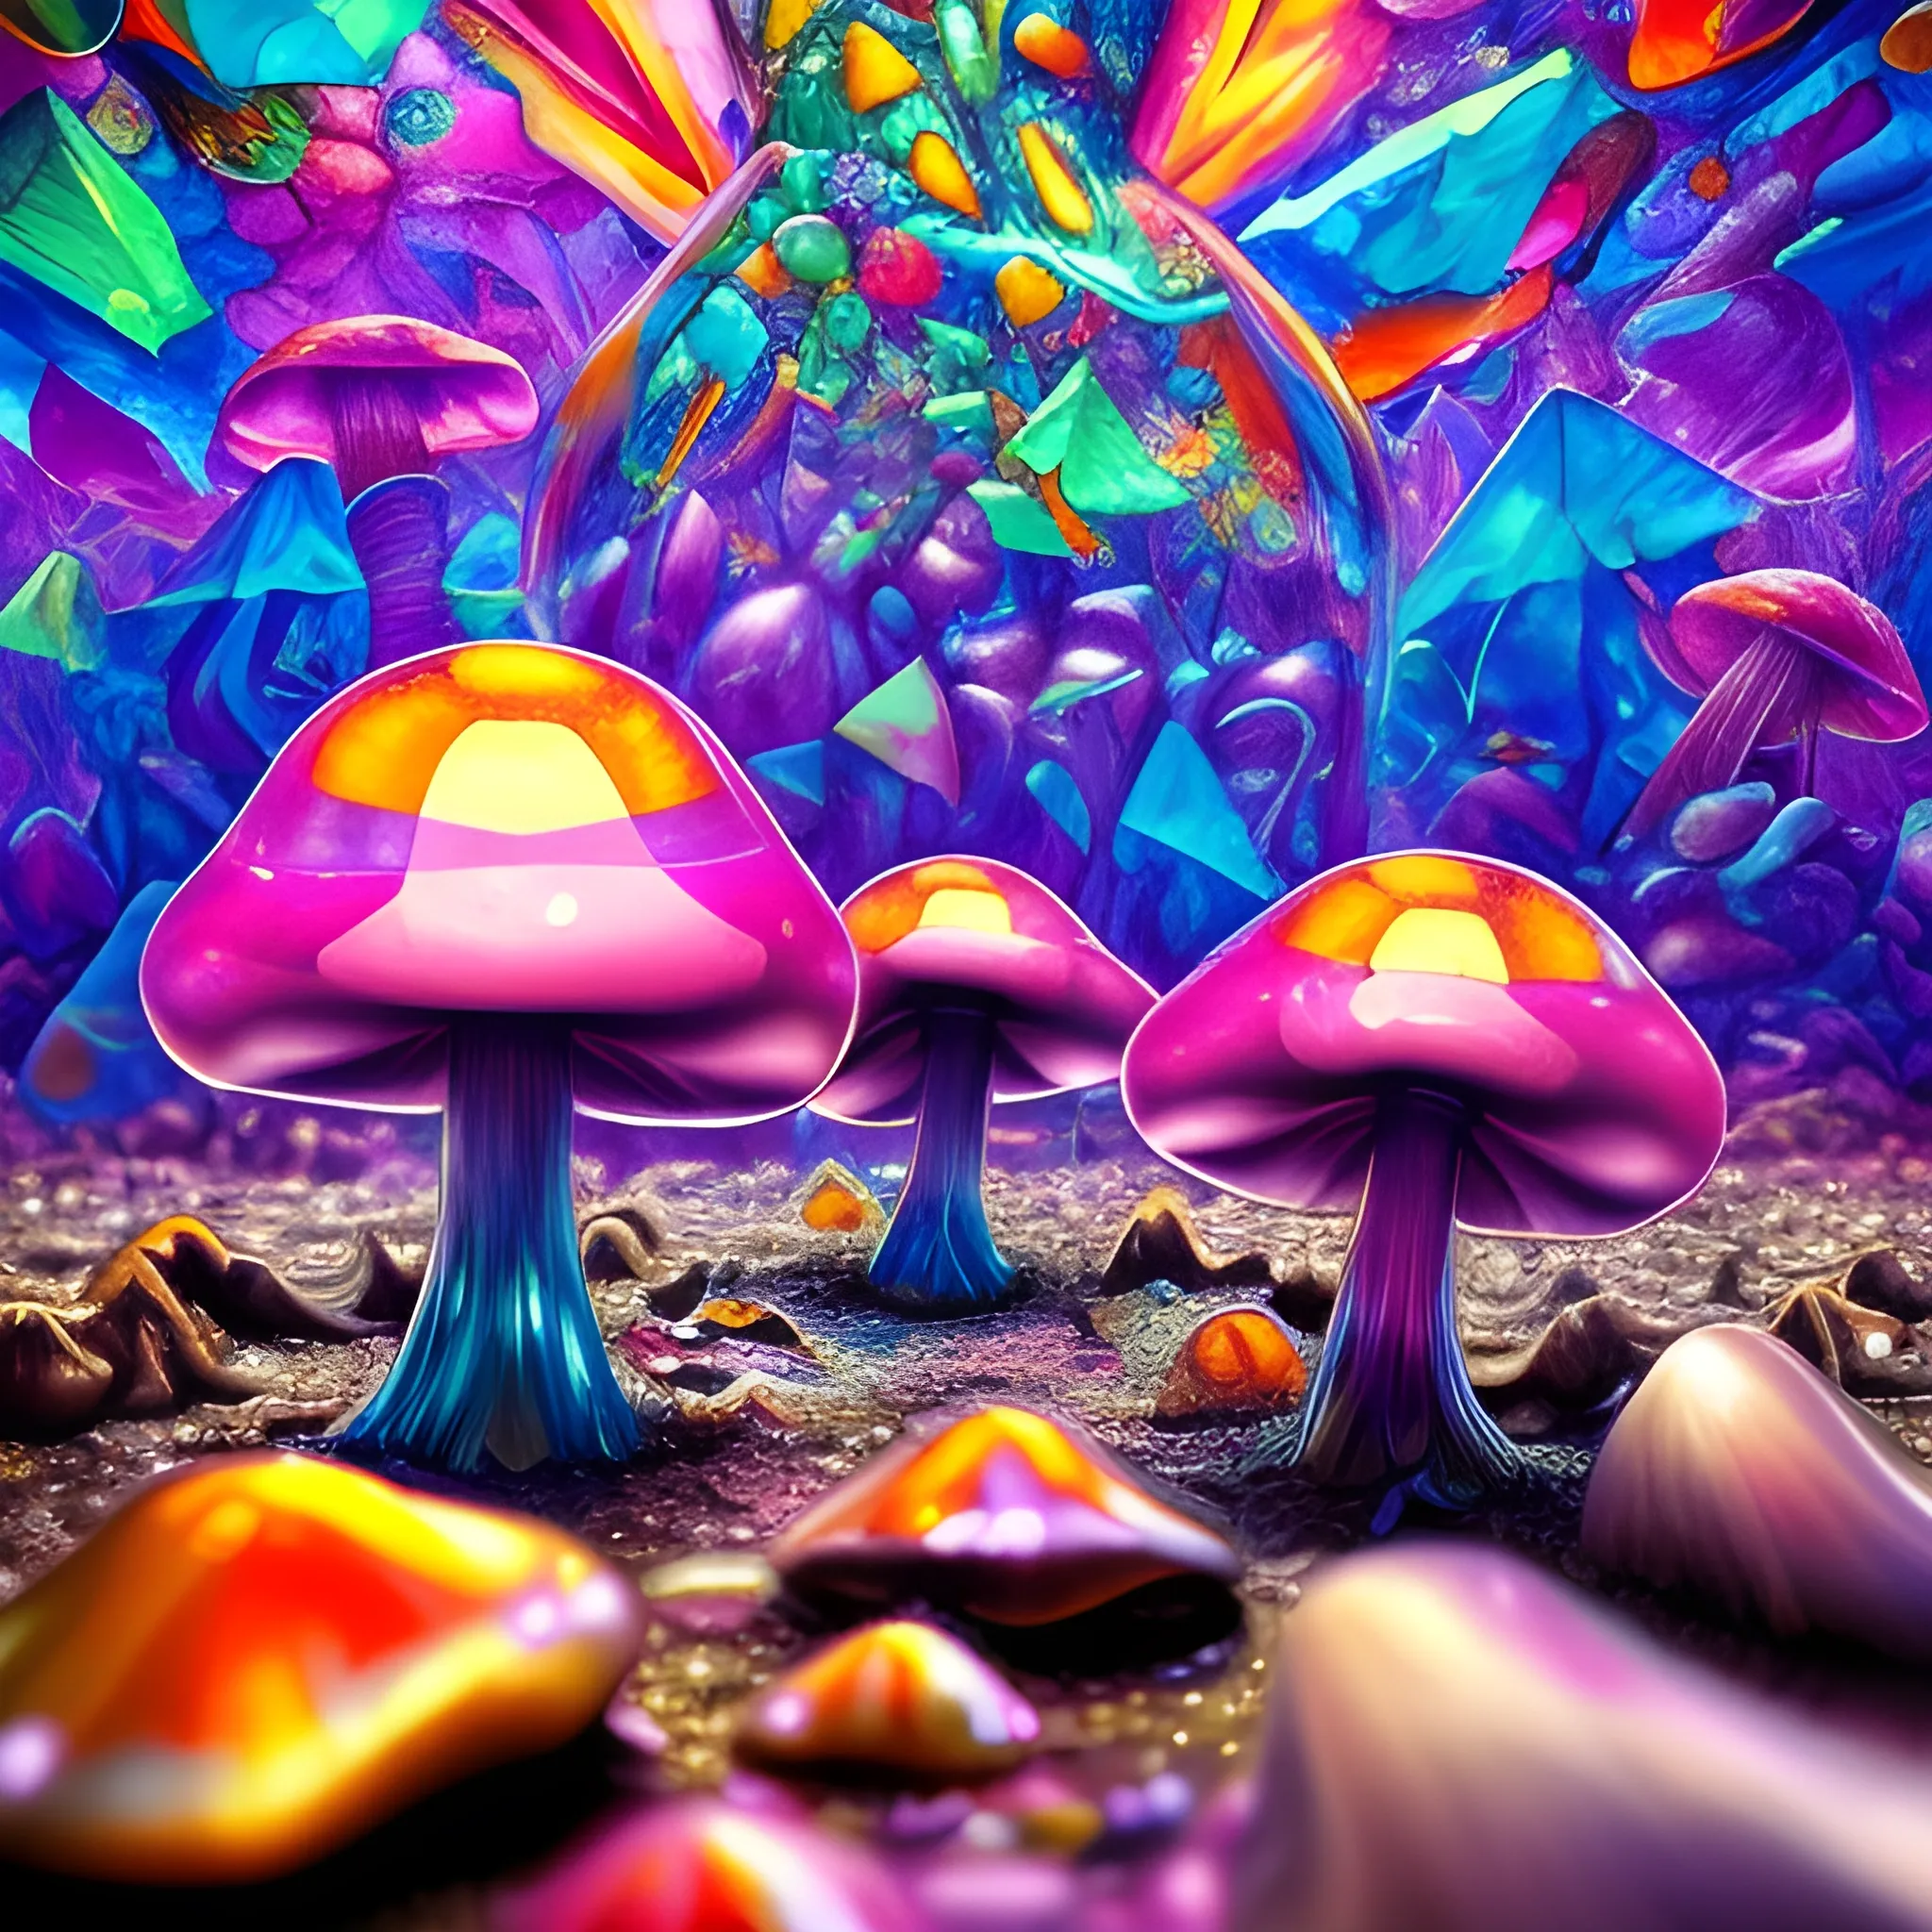 many crystal crazy mushrooms with human face, crystal frogs around, many broken glass in the air, saturated colors, surrealism, chaotic background, 3D, Trippy,  eerie atmosphere, close up, Oil Painting, angular perspective 